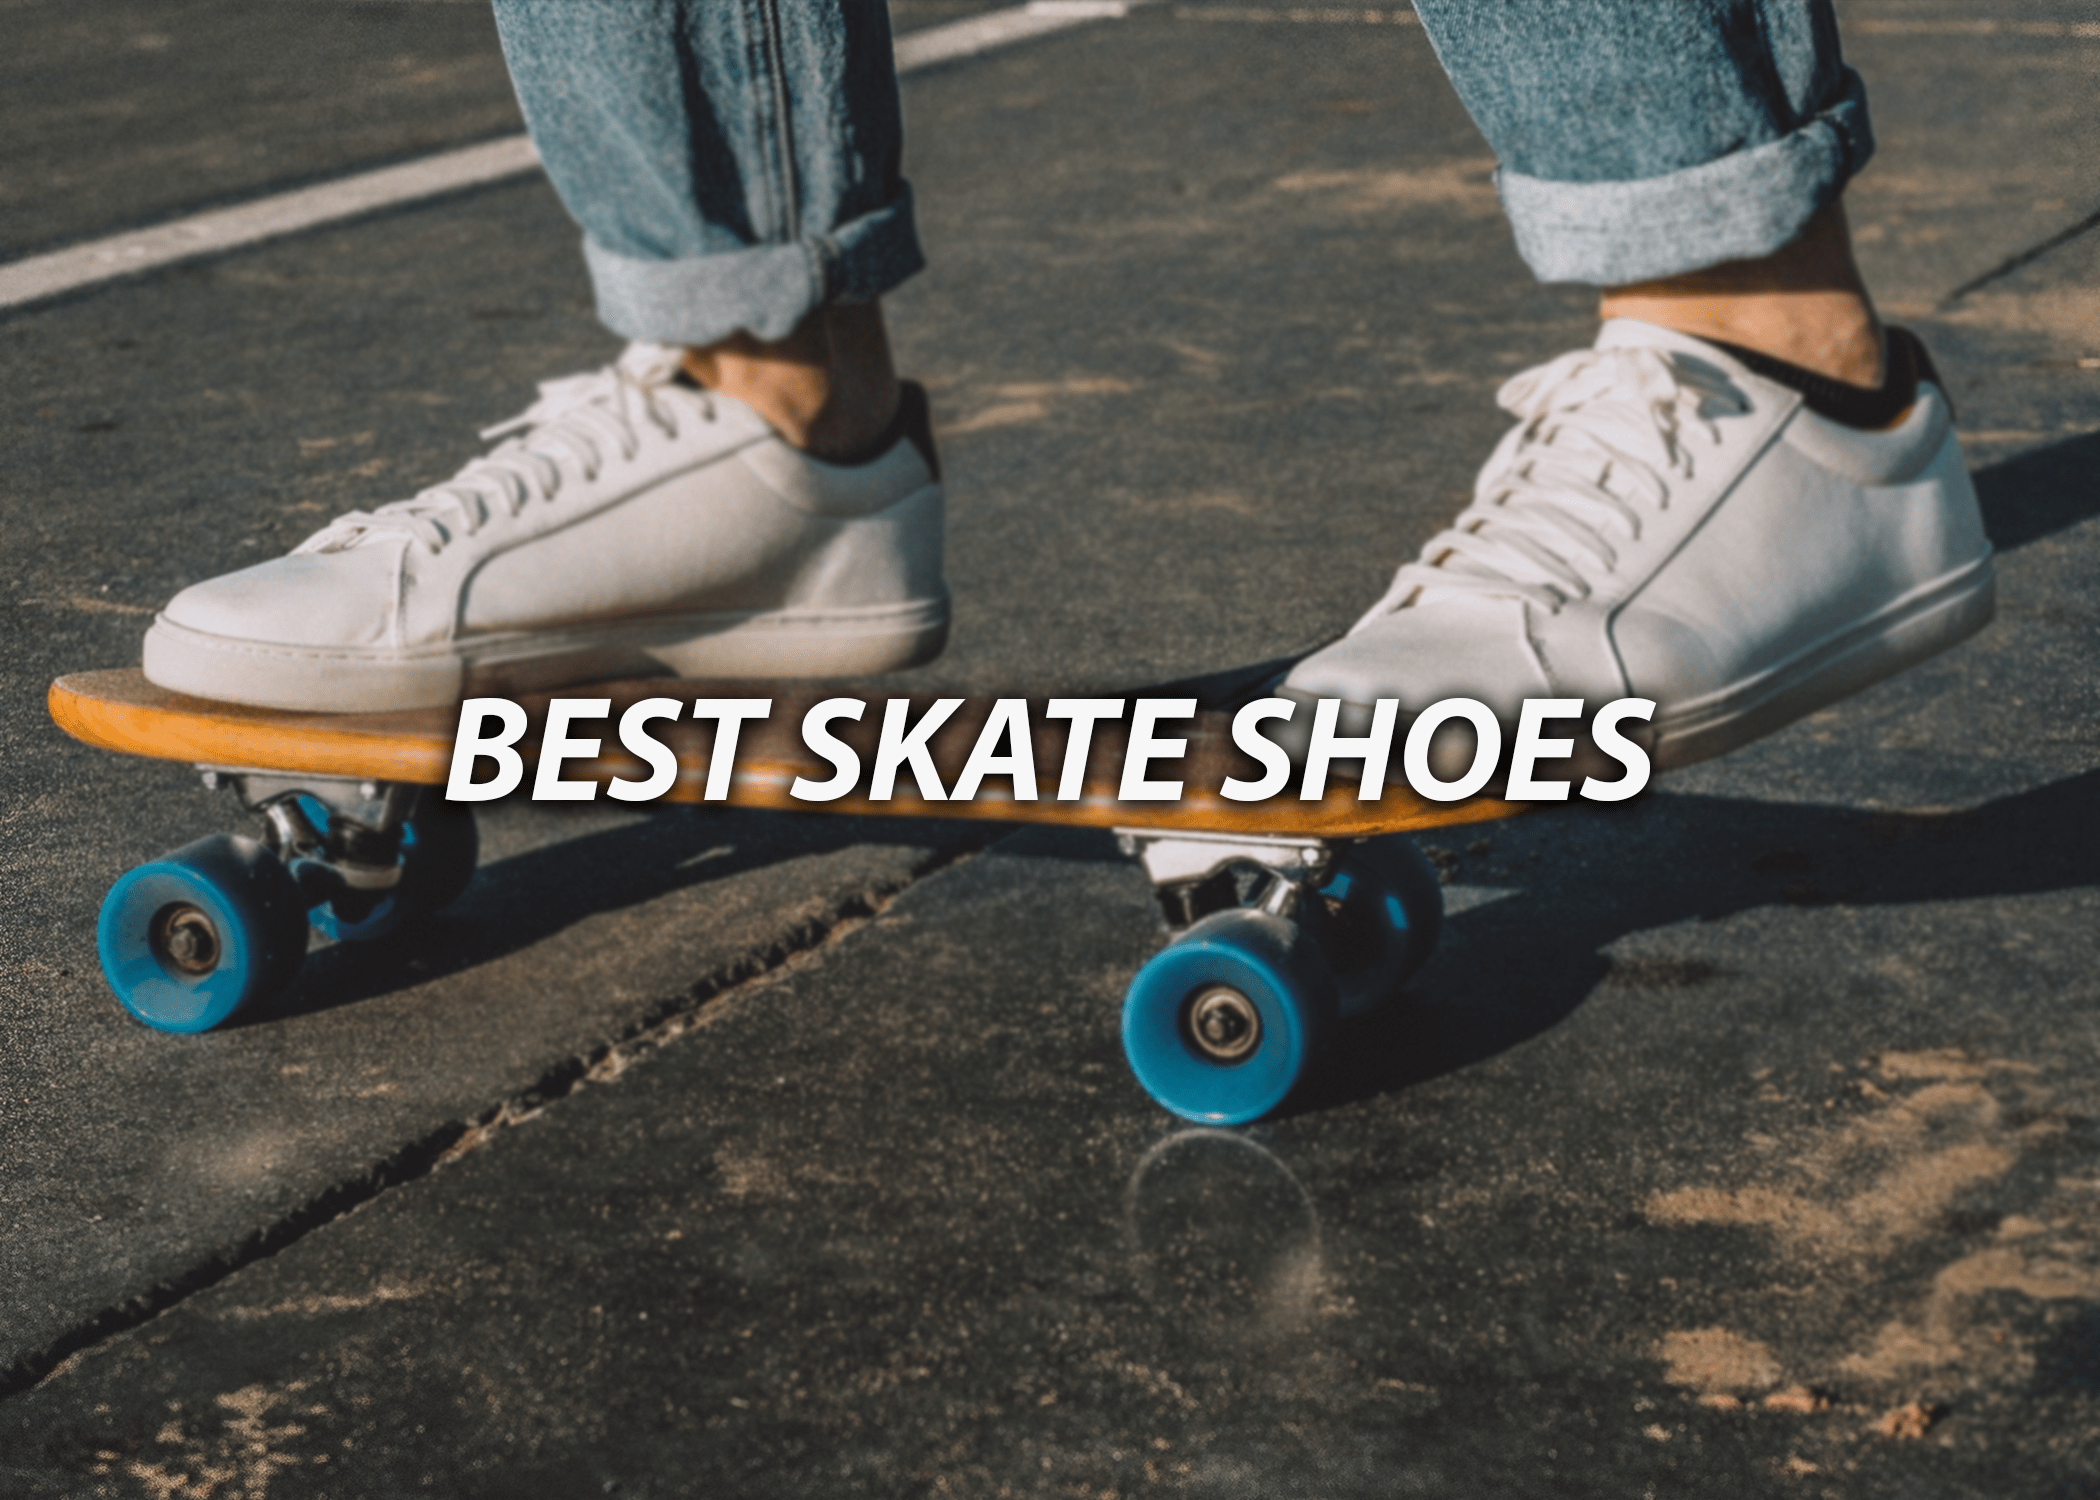 Best Skateboarding Shoes - Review of 